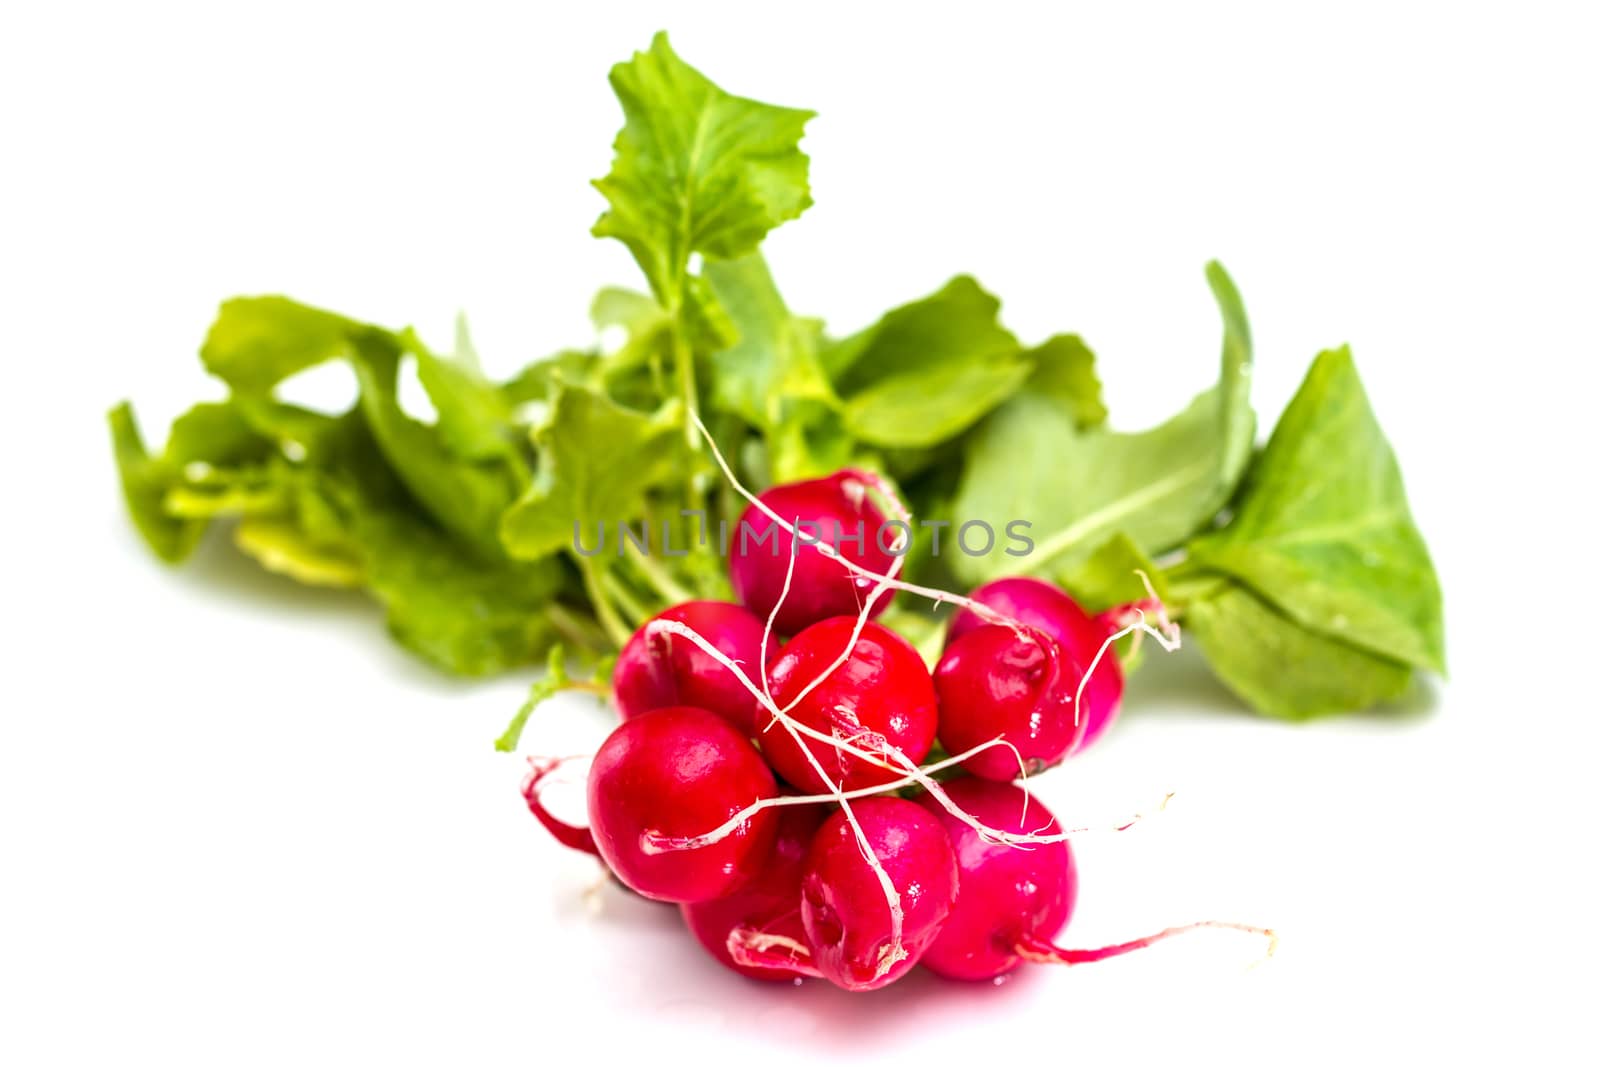 Bunch of fresh red radishes with green tops isolated on white background